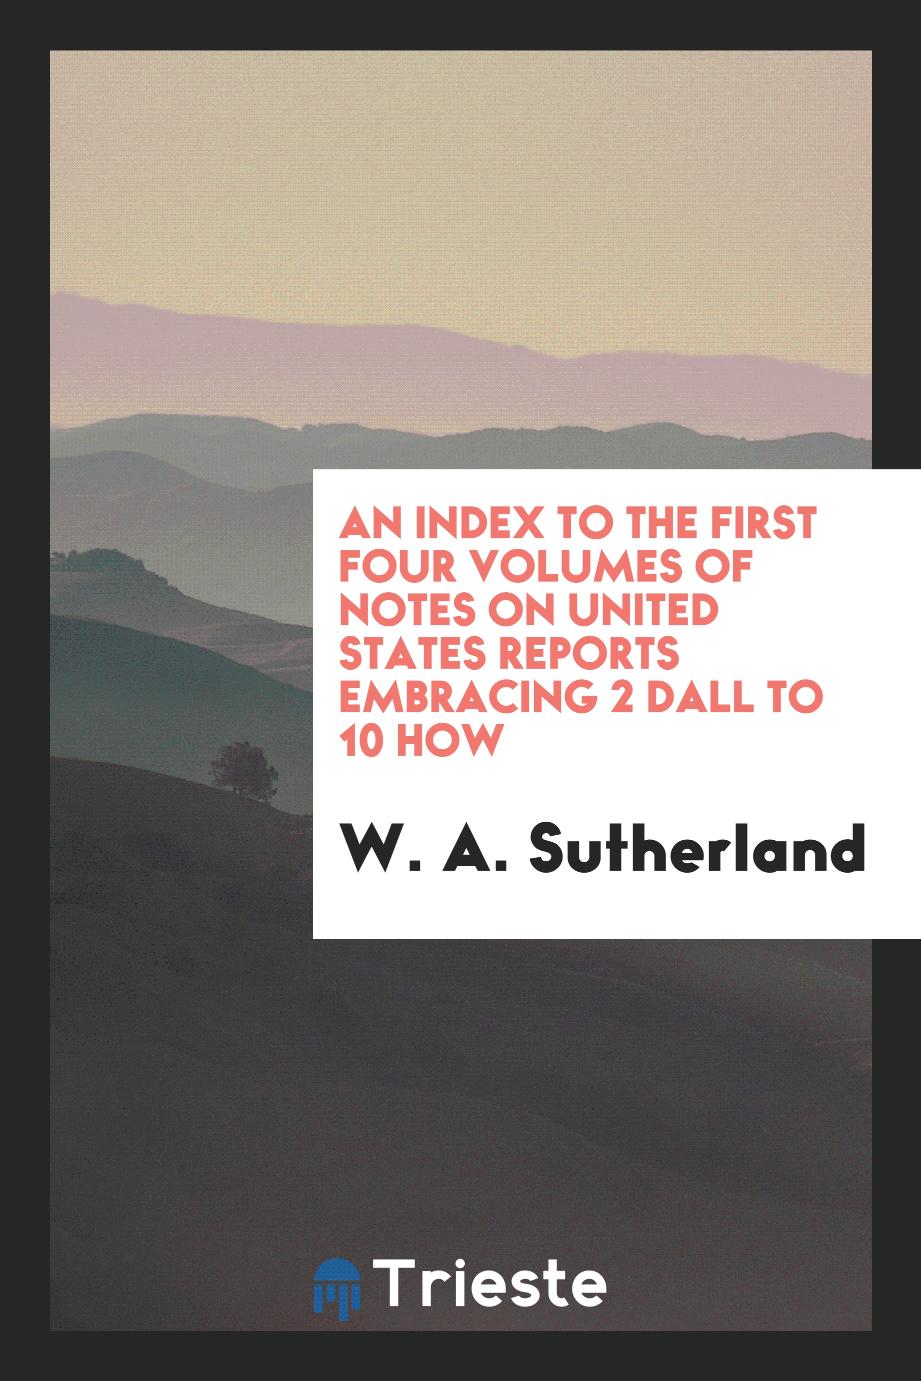 An Index to the First Four Volumes of Notes on United States Reports Embracing 2 Dall to 10 How